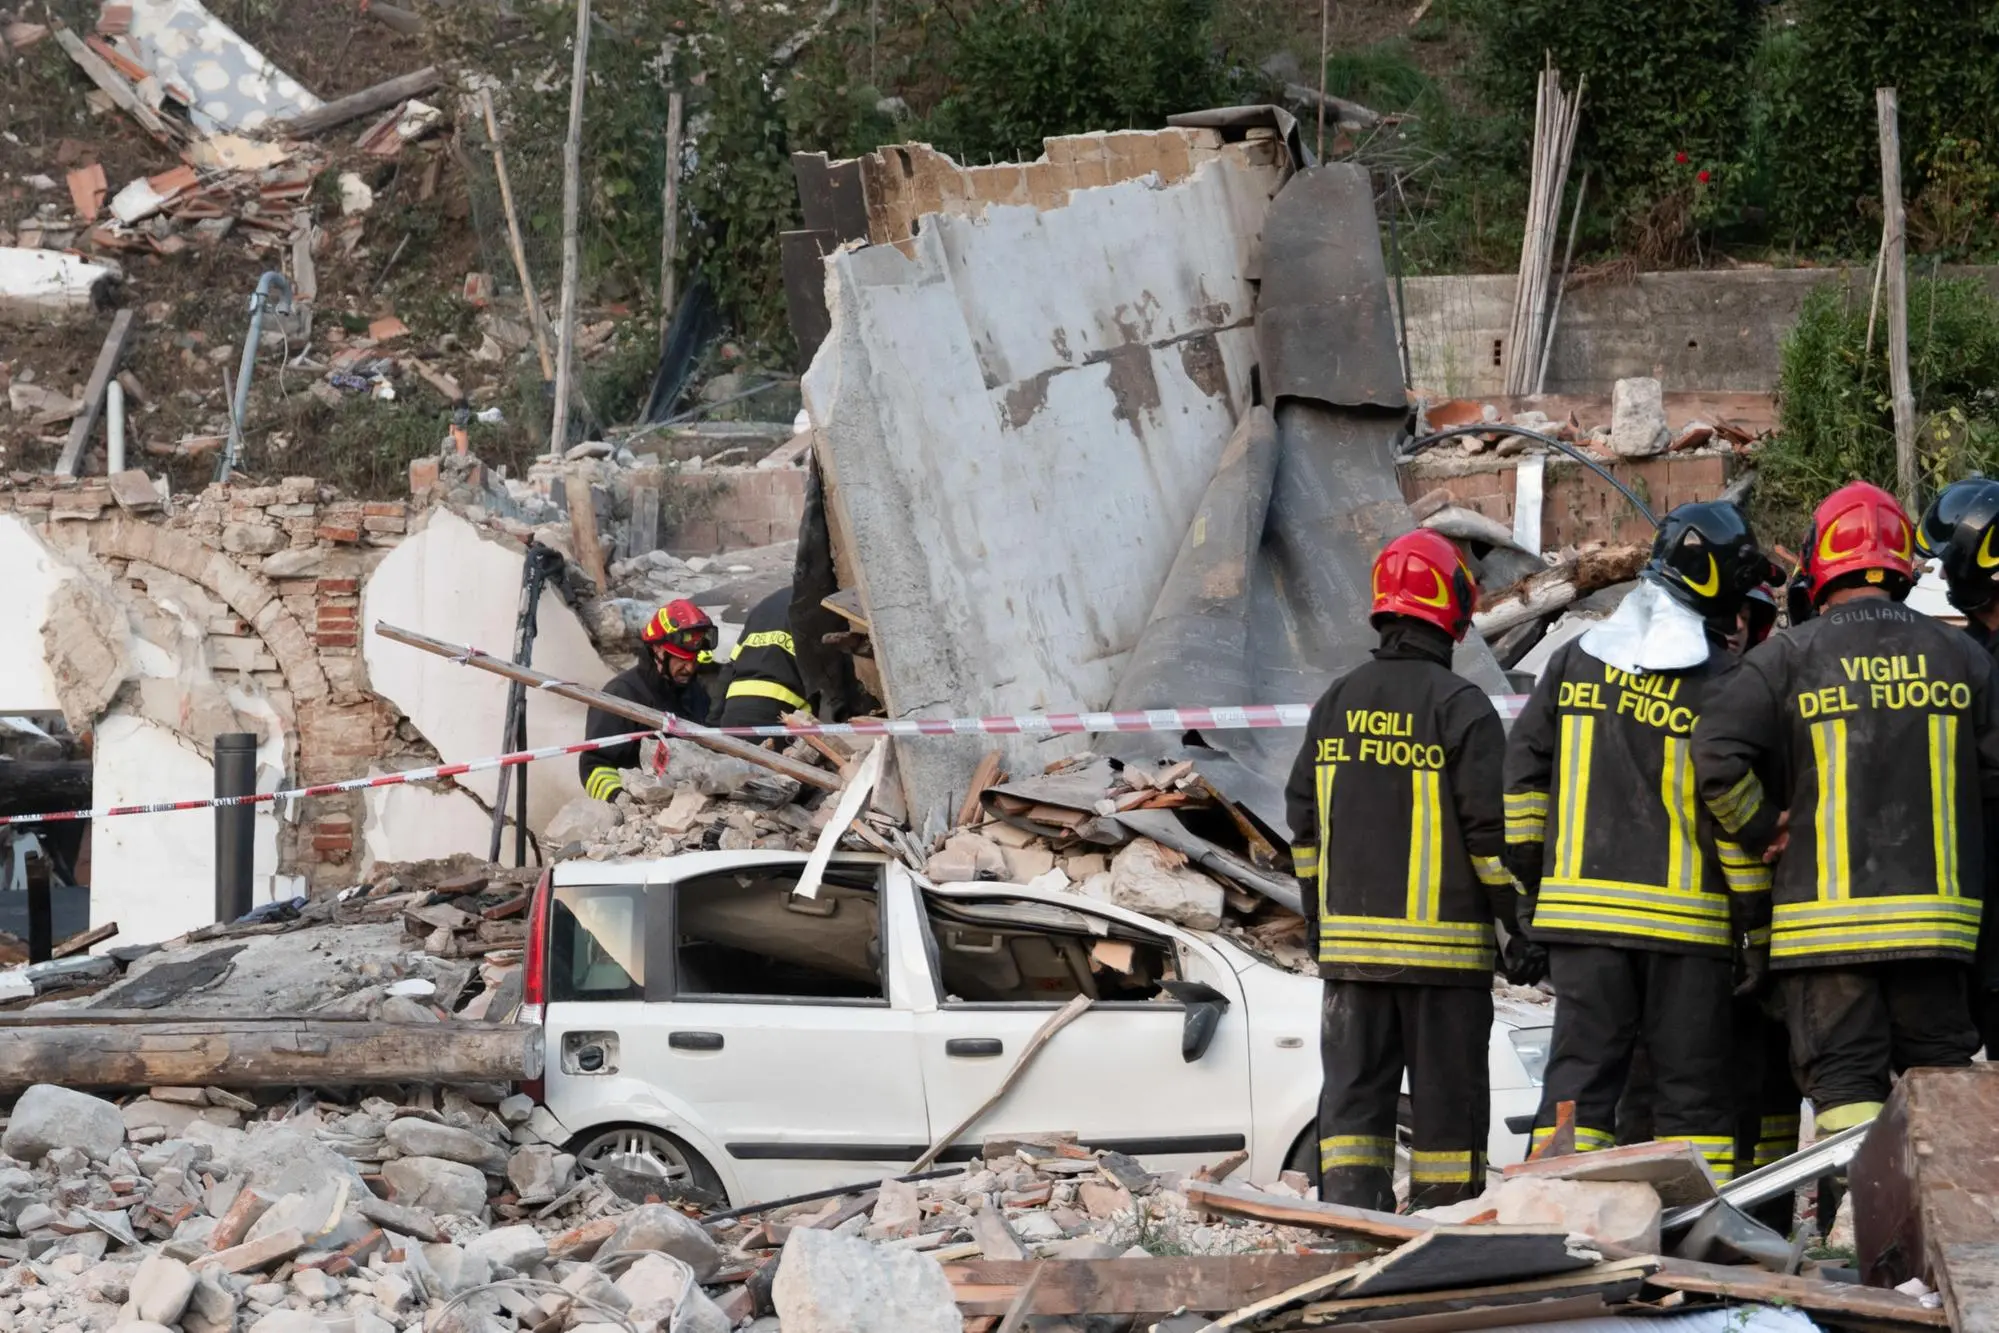 The rubble after the explosion in Lucca (Ansa)